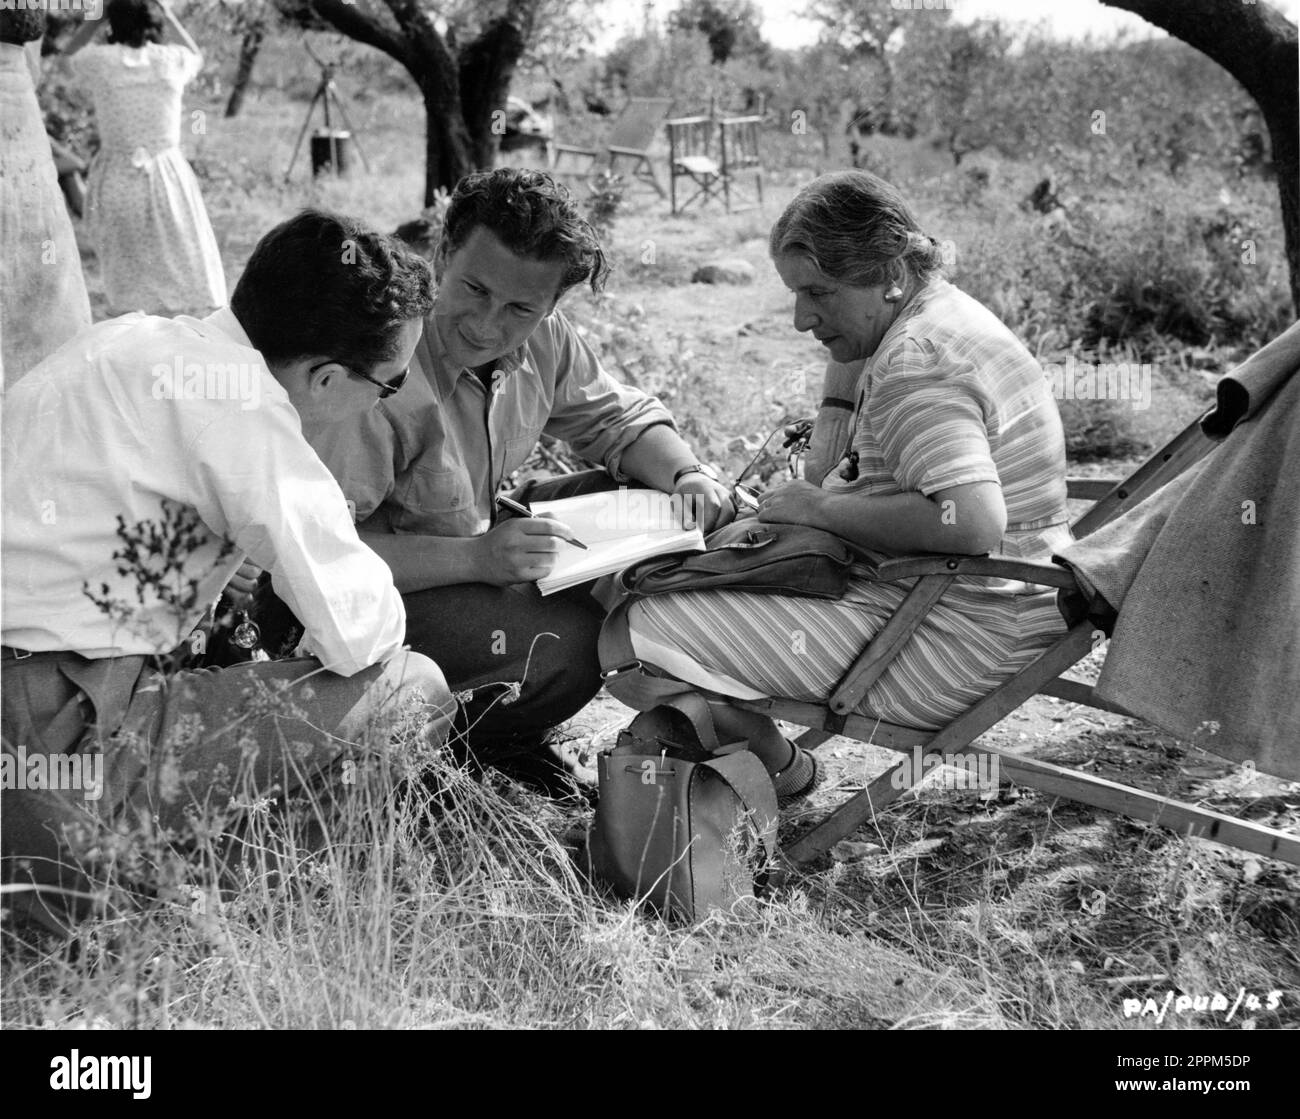 PETER USTINOV discusses a costume sketch with his mother Costume Designer NADIA BENOIS on set location candid in Central Italy during filming of PRIVATE ANGELO 1949 directors / producers / screenplay MICHAEL ANDERSON and PETER USTINOV novel Eric Linklater costume design Nadia Benois Pilgrim Pictures / Associated British-Pathe Stock Photo